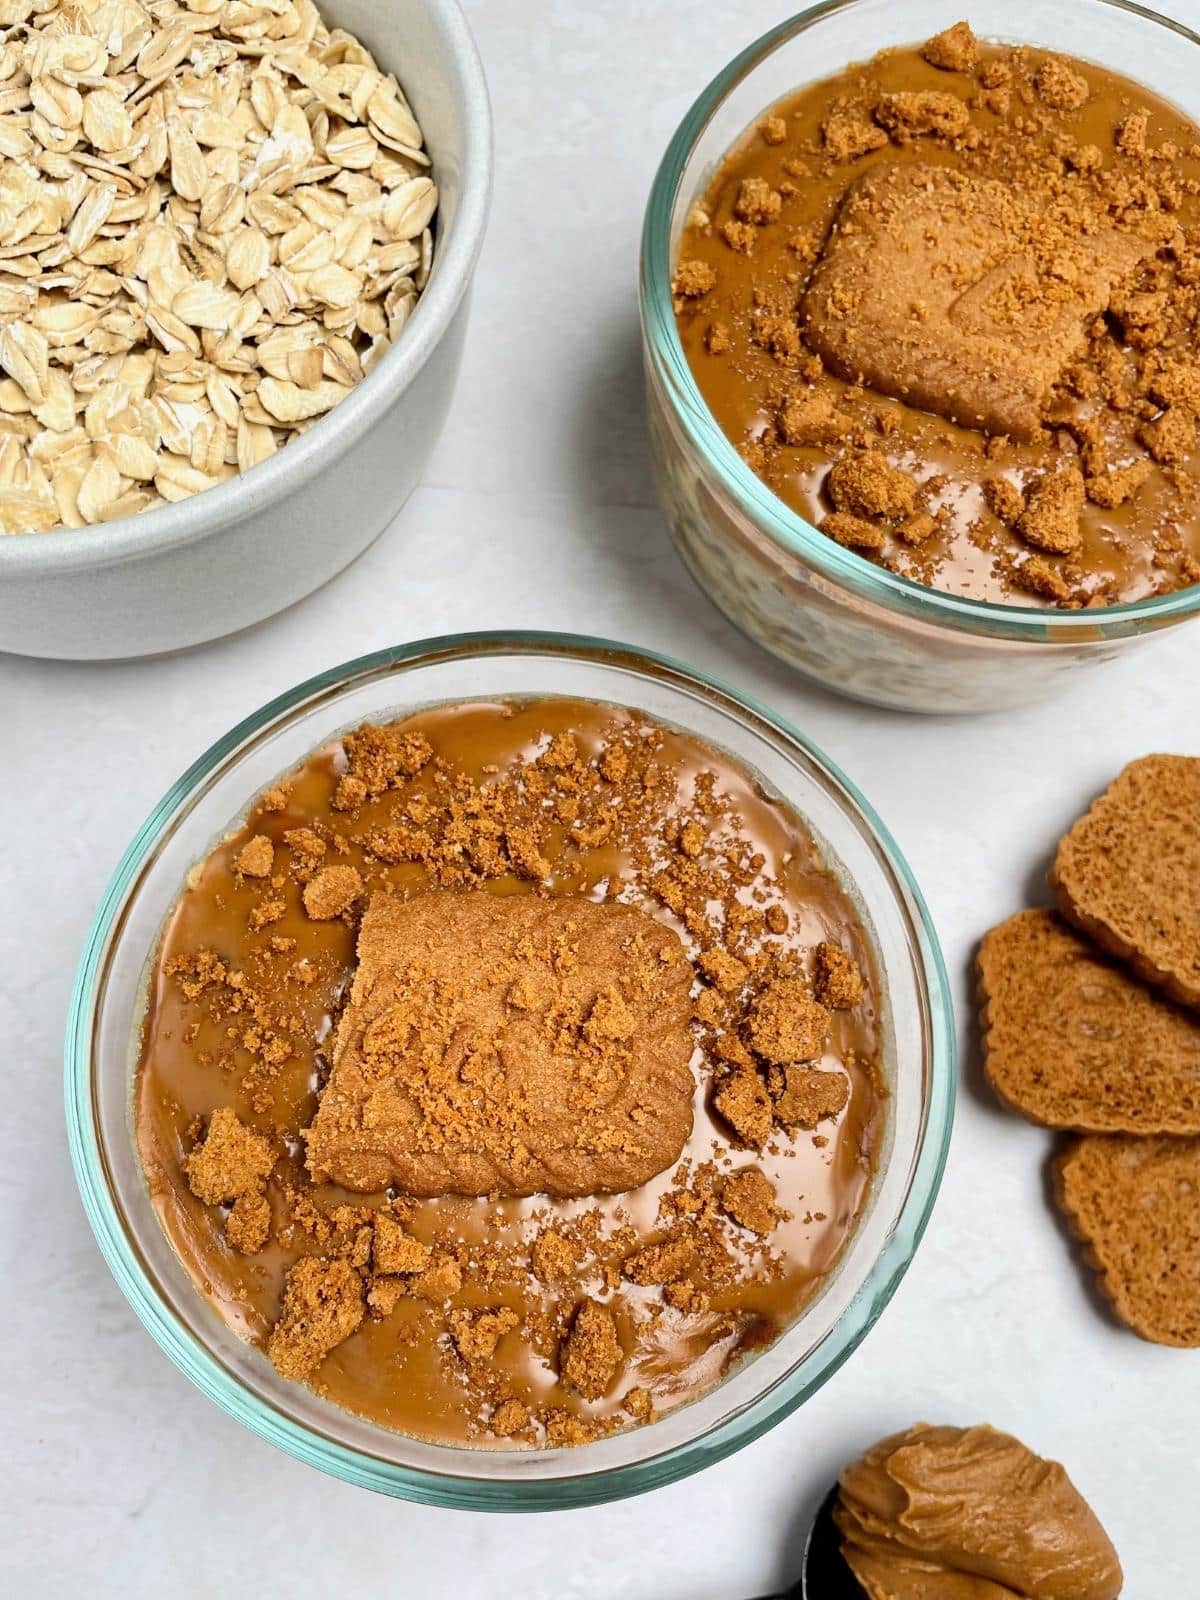 Oats with biscoff spread.